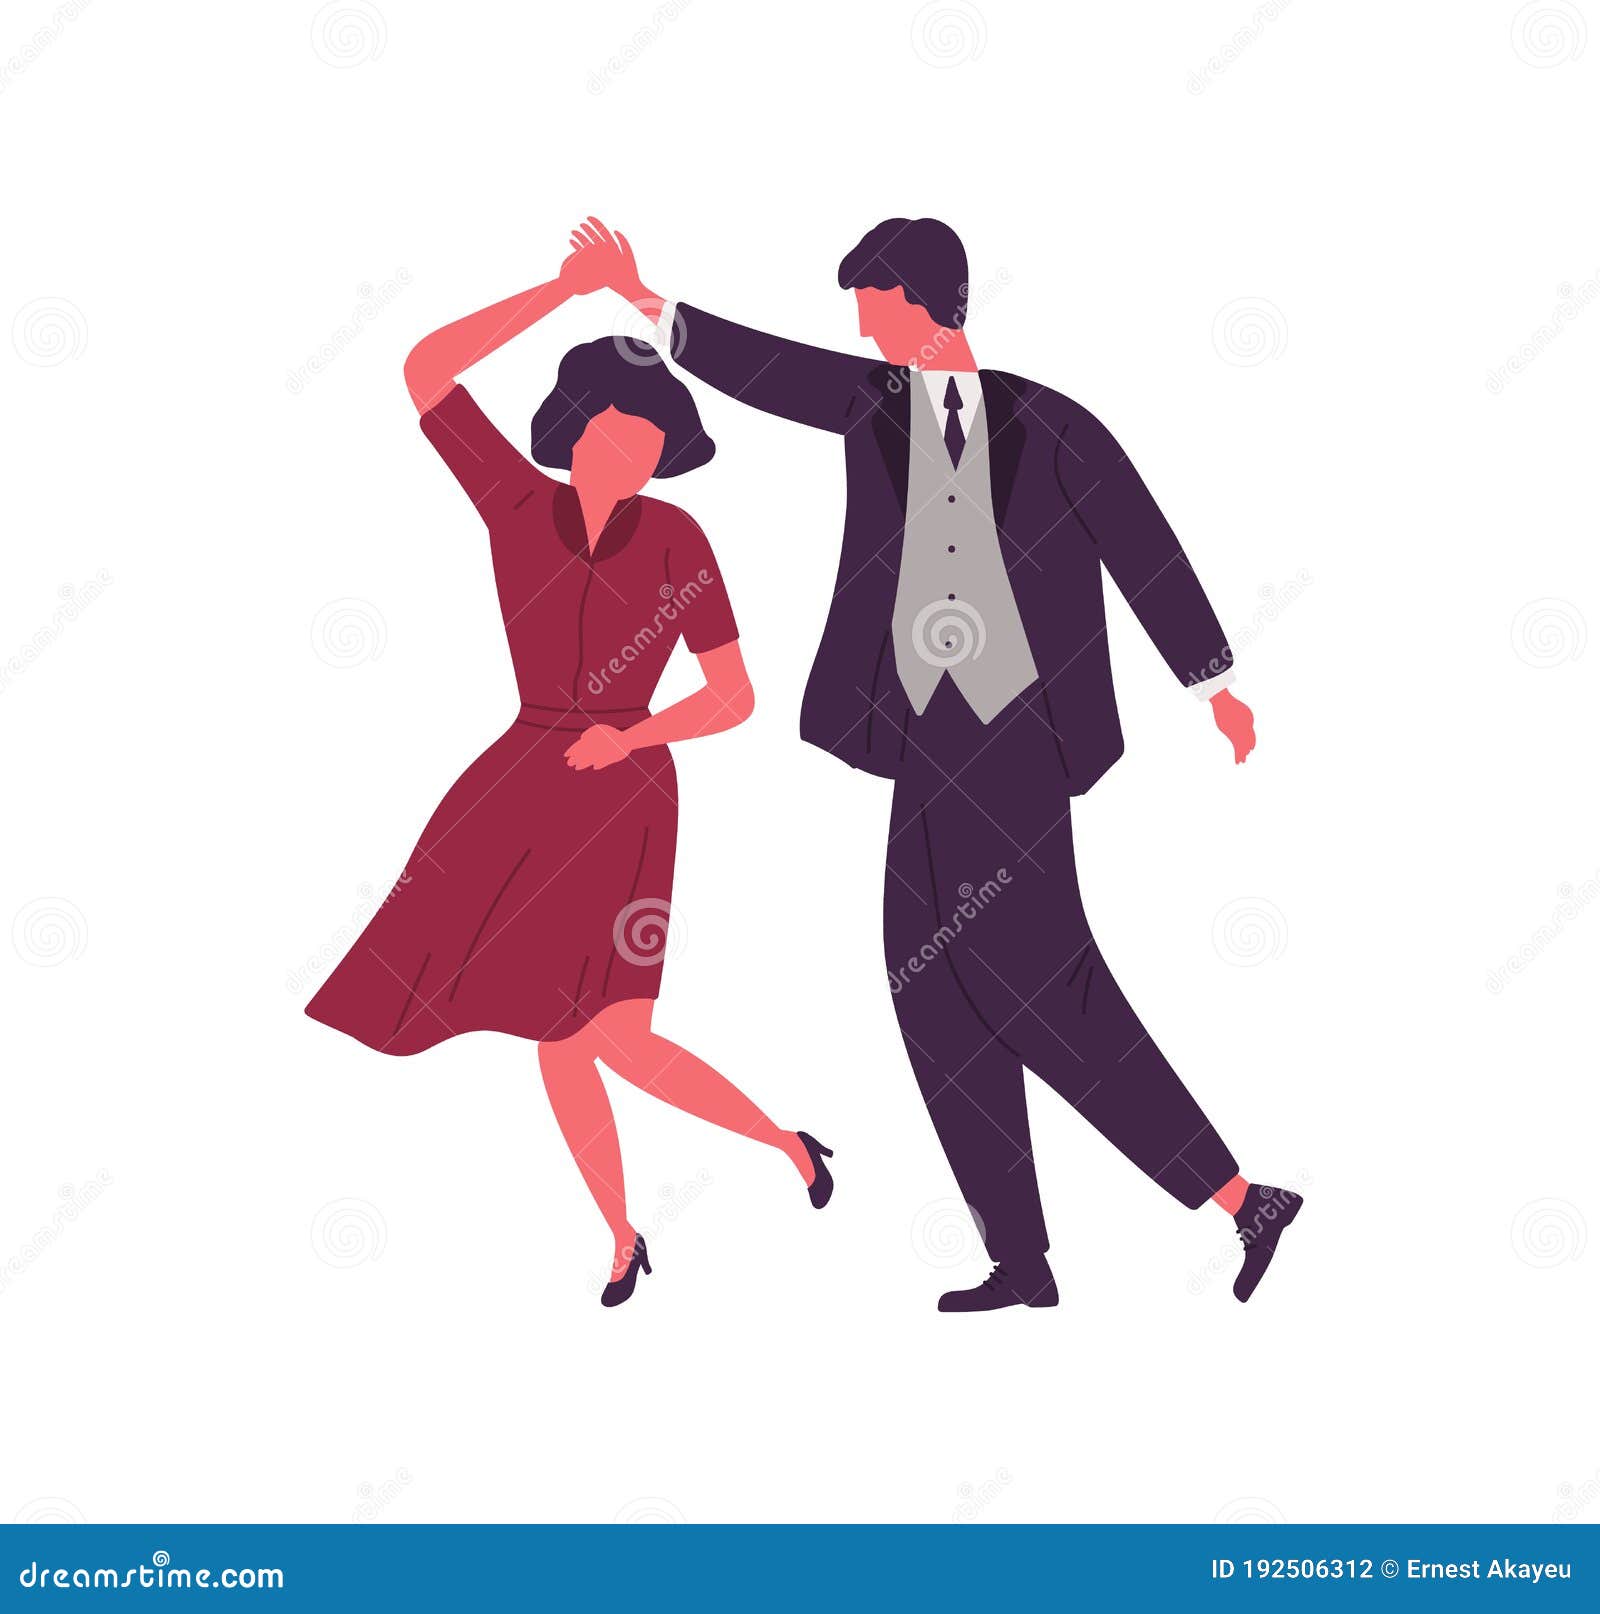 Couple Dancing Together Holding Hands Vector Flat Illustration Man And Woman Dancers Performing